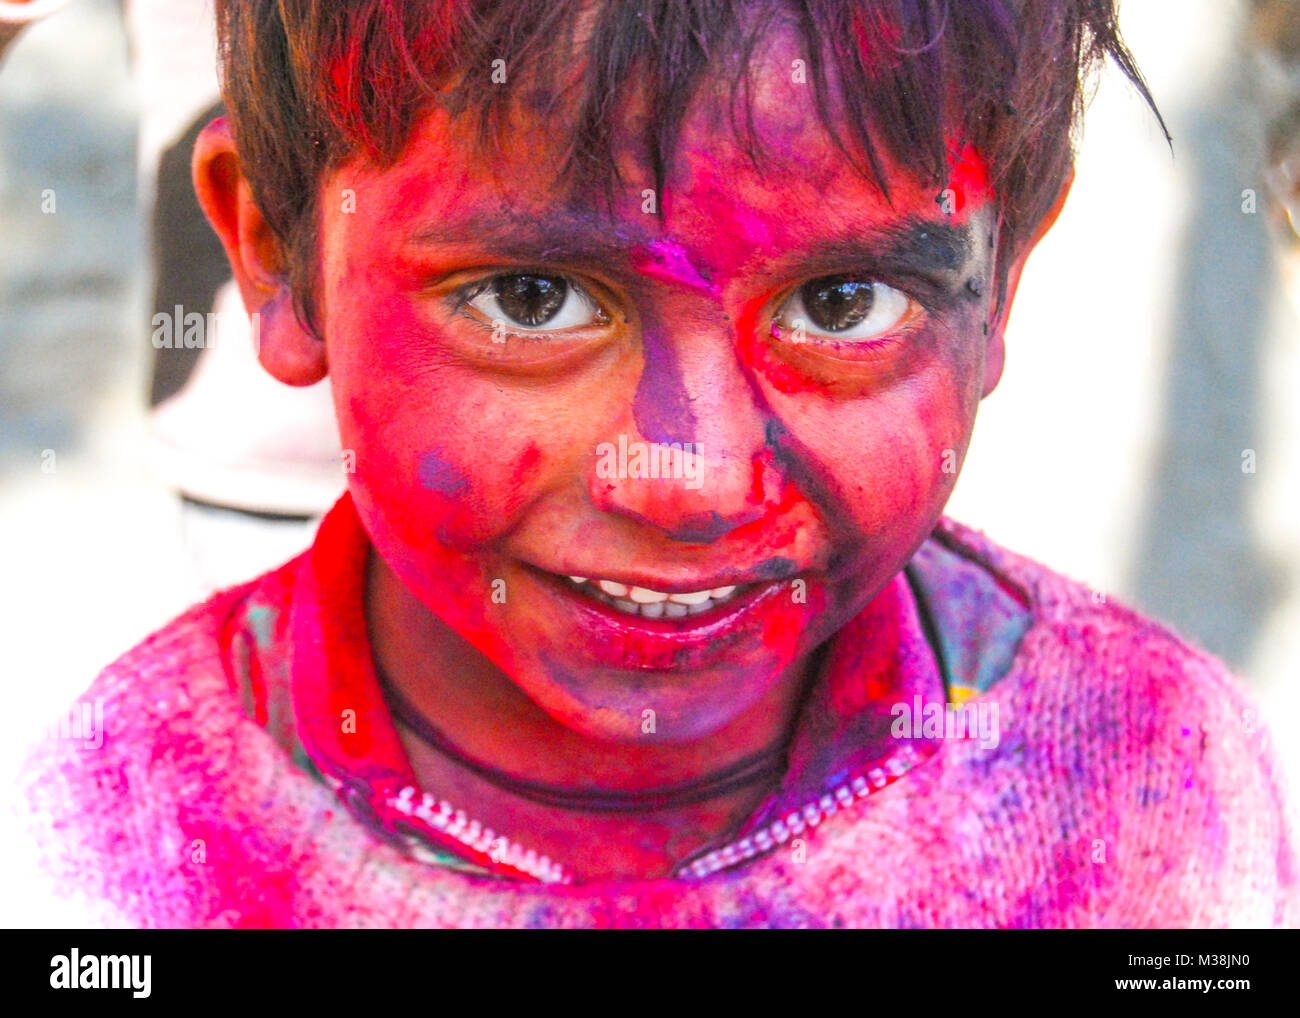 A little boy covered in powder paint during the celebration of the Hindu spring festival Holi in New Delhi, India. Stock Photo